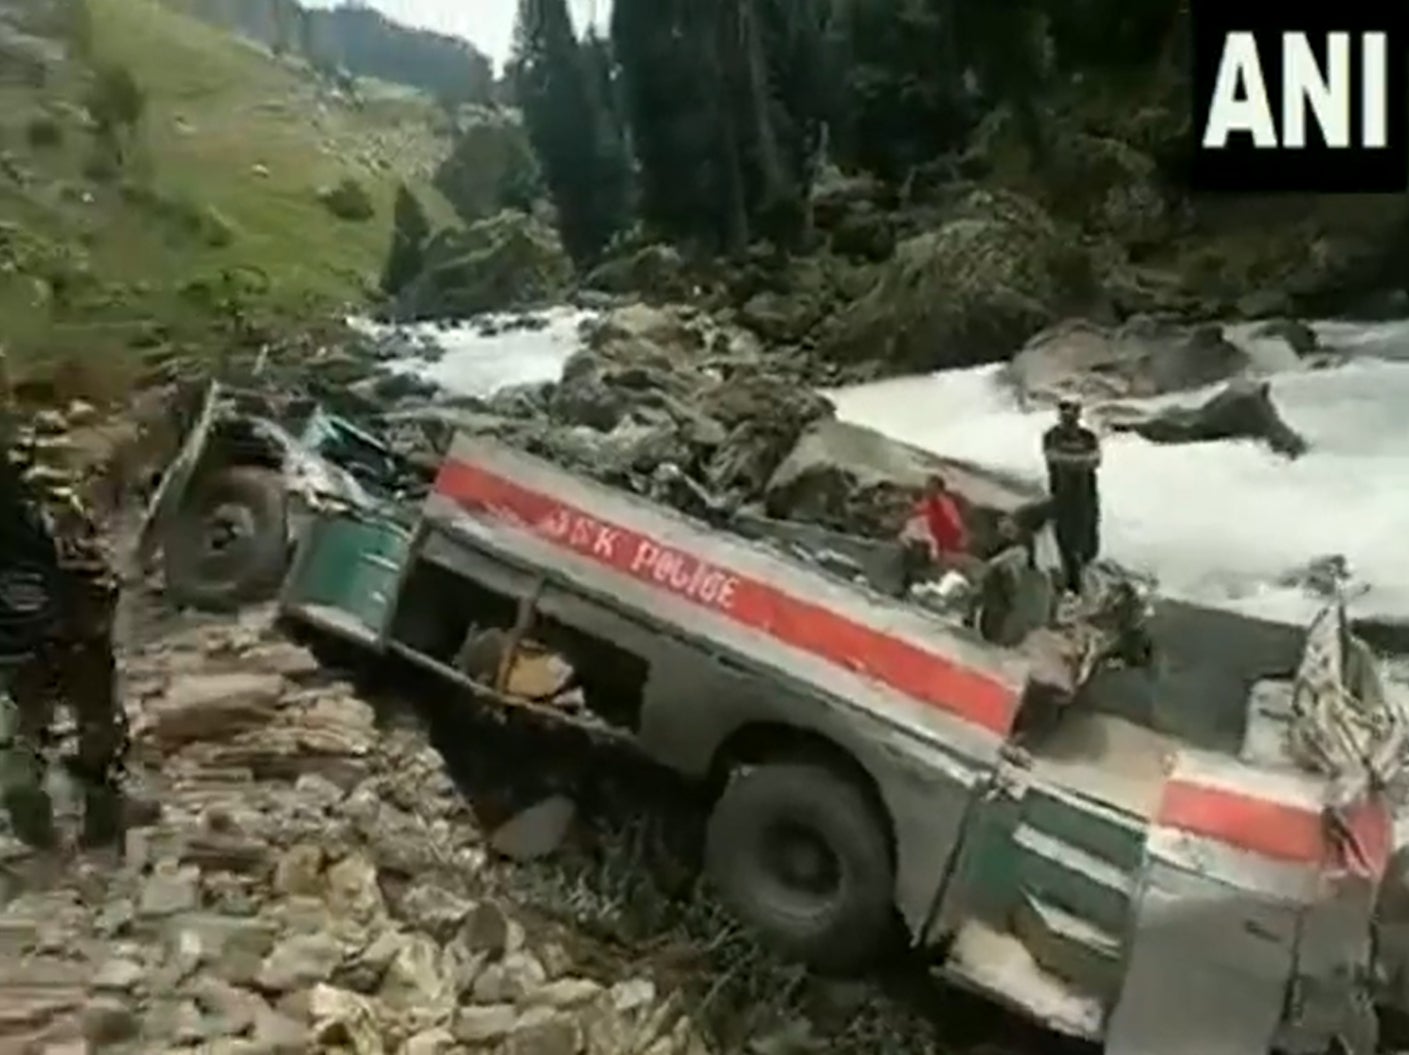 Seven soldiers of Indian army were killed after bus carrying paramilitary soldiers in Indian-controlled Kashmir skidded off a mountain road and rolled into a river